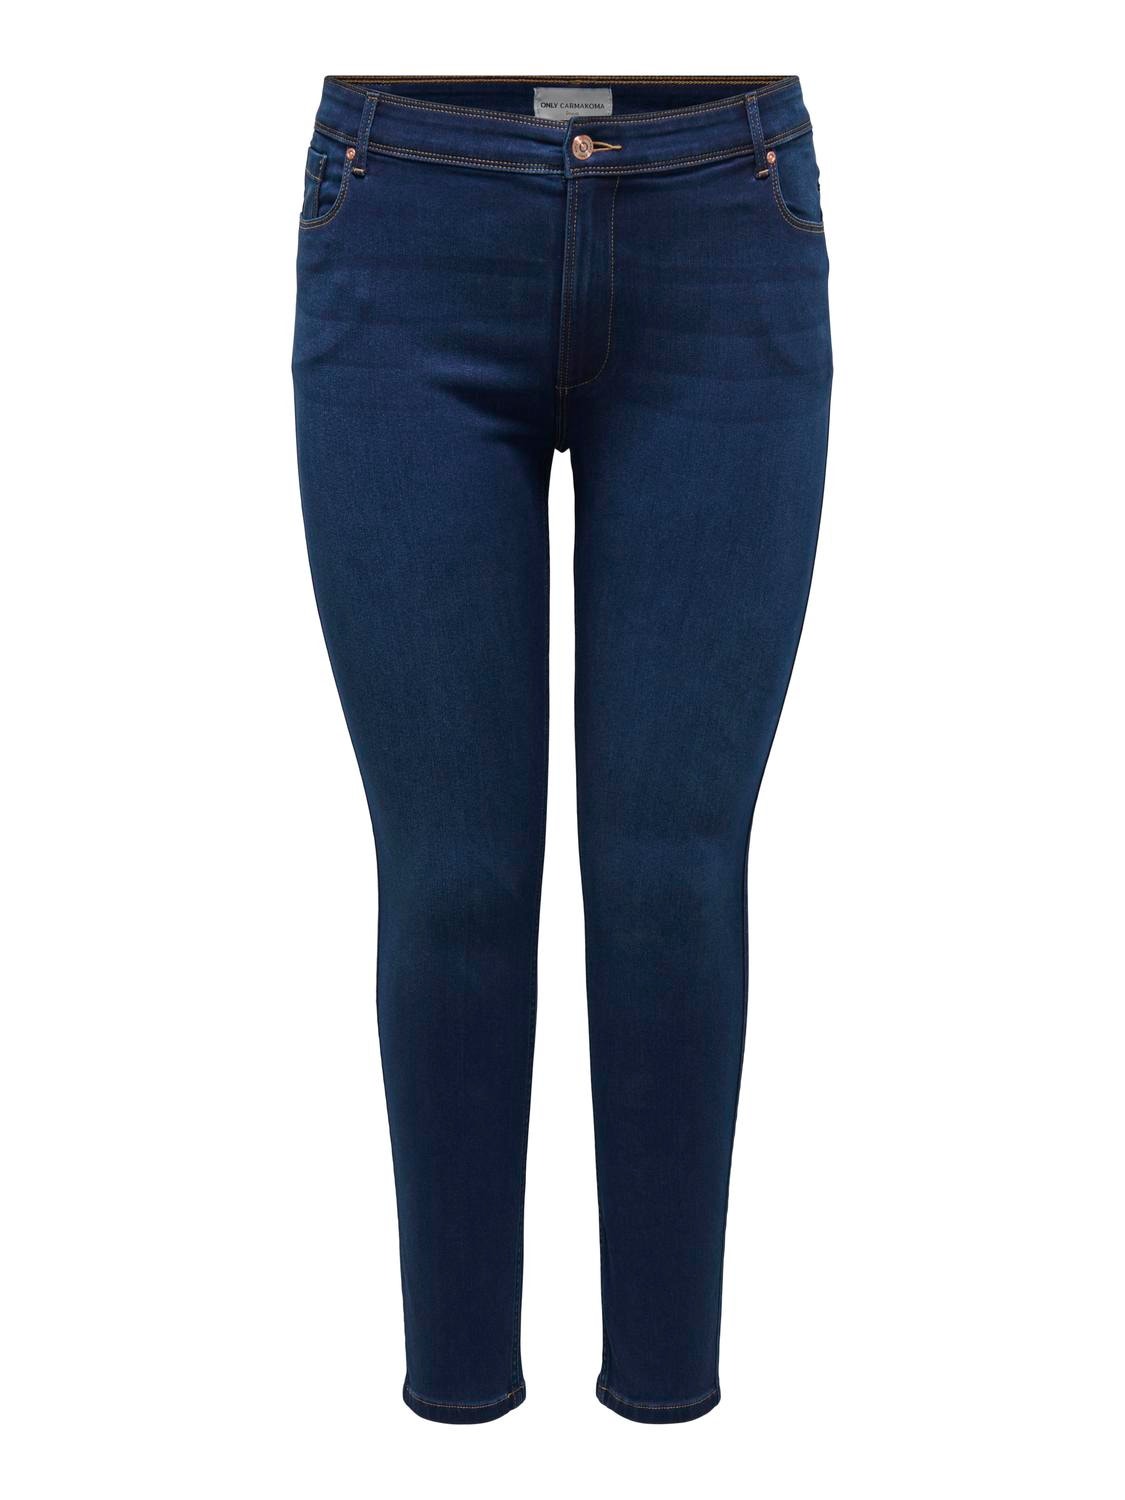 ONLY Jeans Skinny Fit Taille moyenne -Dark Blue Denim - 15307666